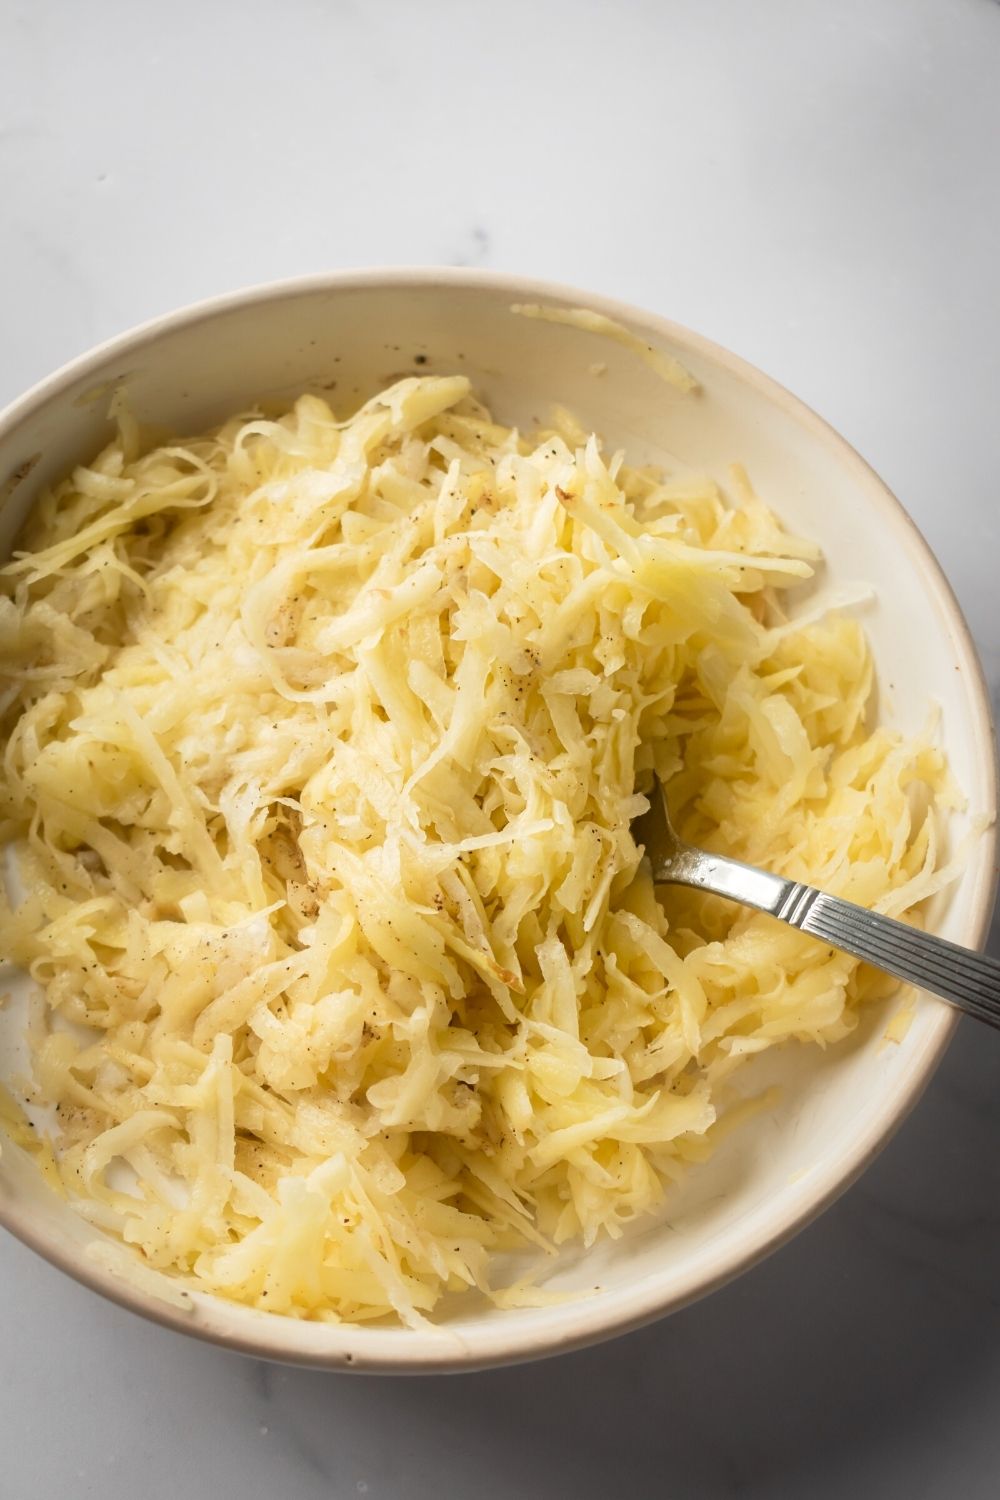 A white bowl filled with shredded potatoes with a fork submerged in the potatoes.